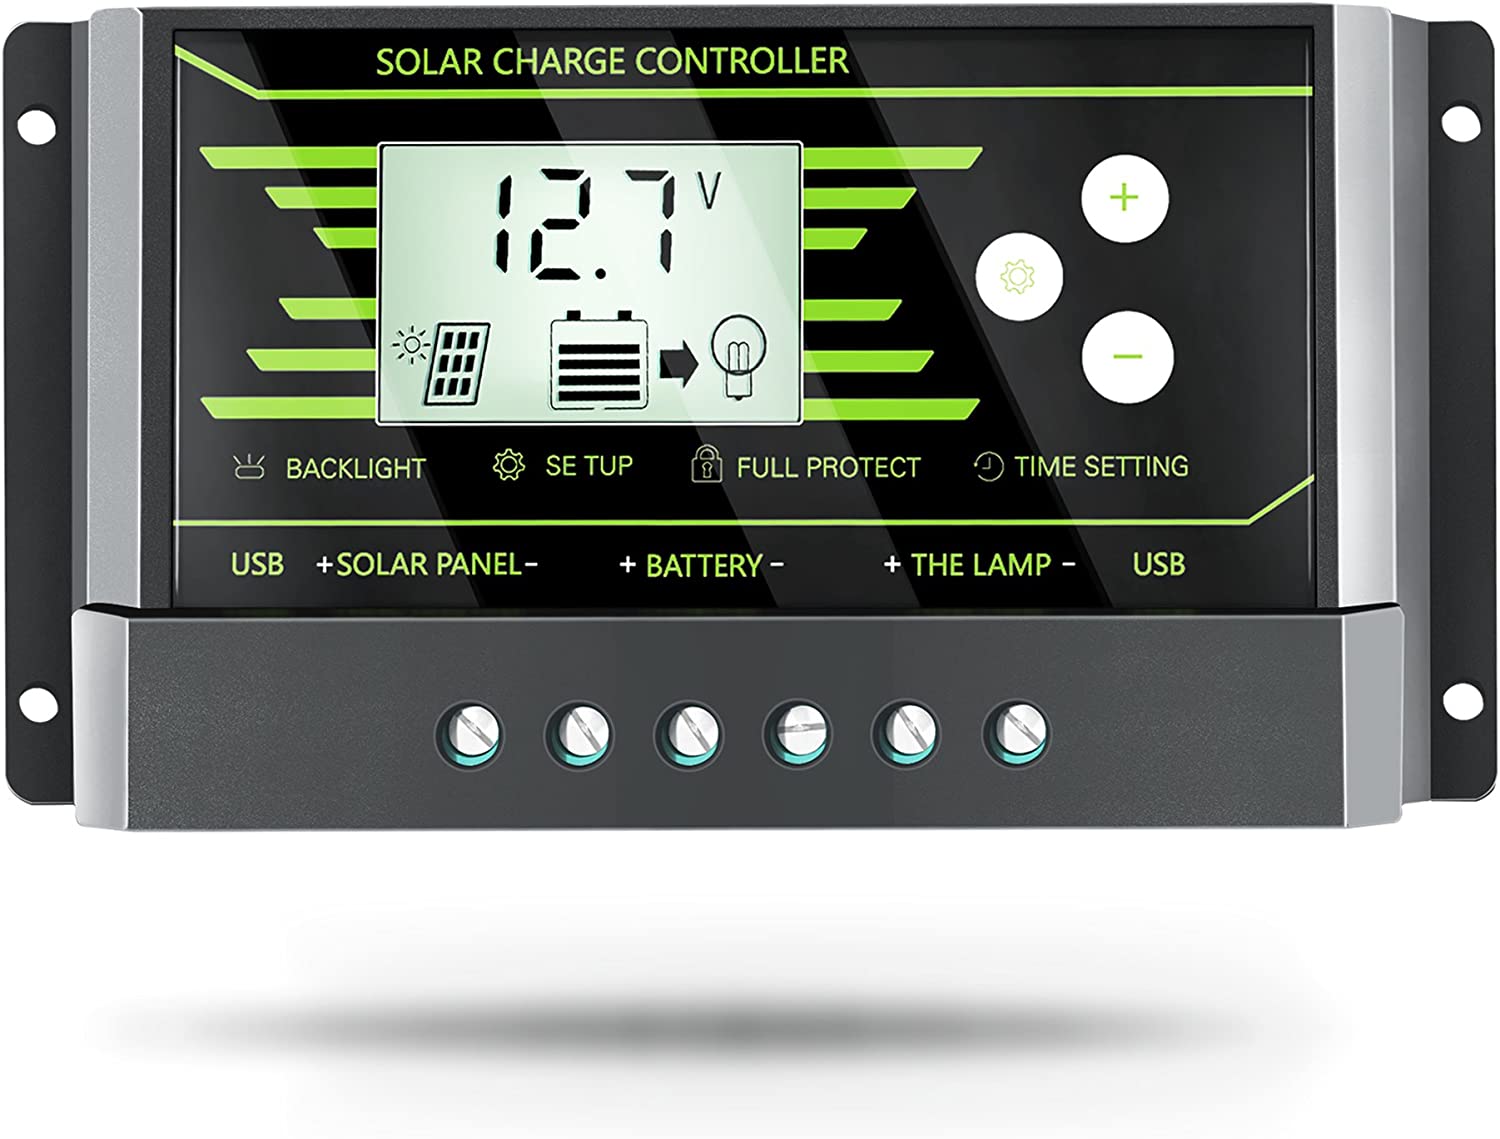 PowMr 30A Solar Charge Controller, Solar Panel Charge Controller 12V 24V Dual USB, Adjustable Parameter Backlight LCD Display and Timer Setting ON/Off Hours(Z30A)